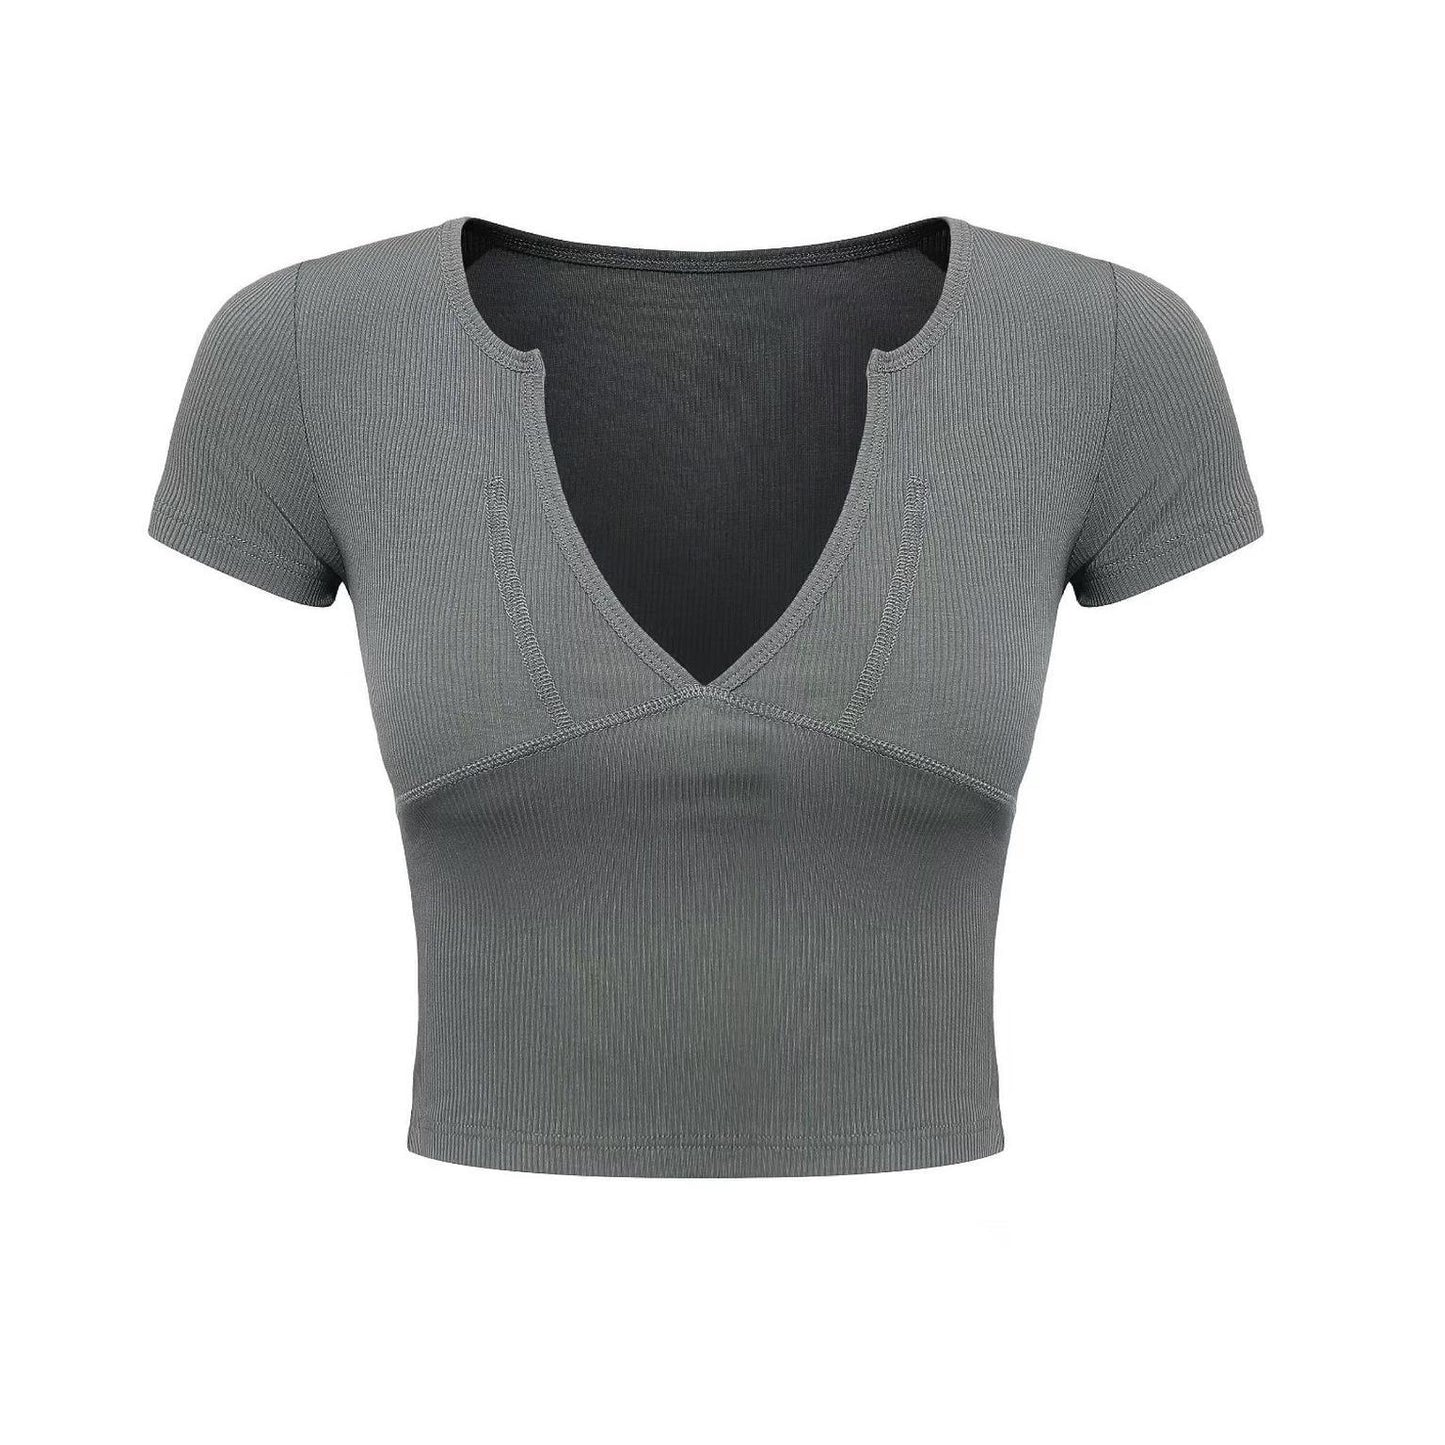 Minimalist Style Outfits | V-neck Short Sleeve Cotton Crop Top